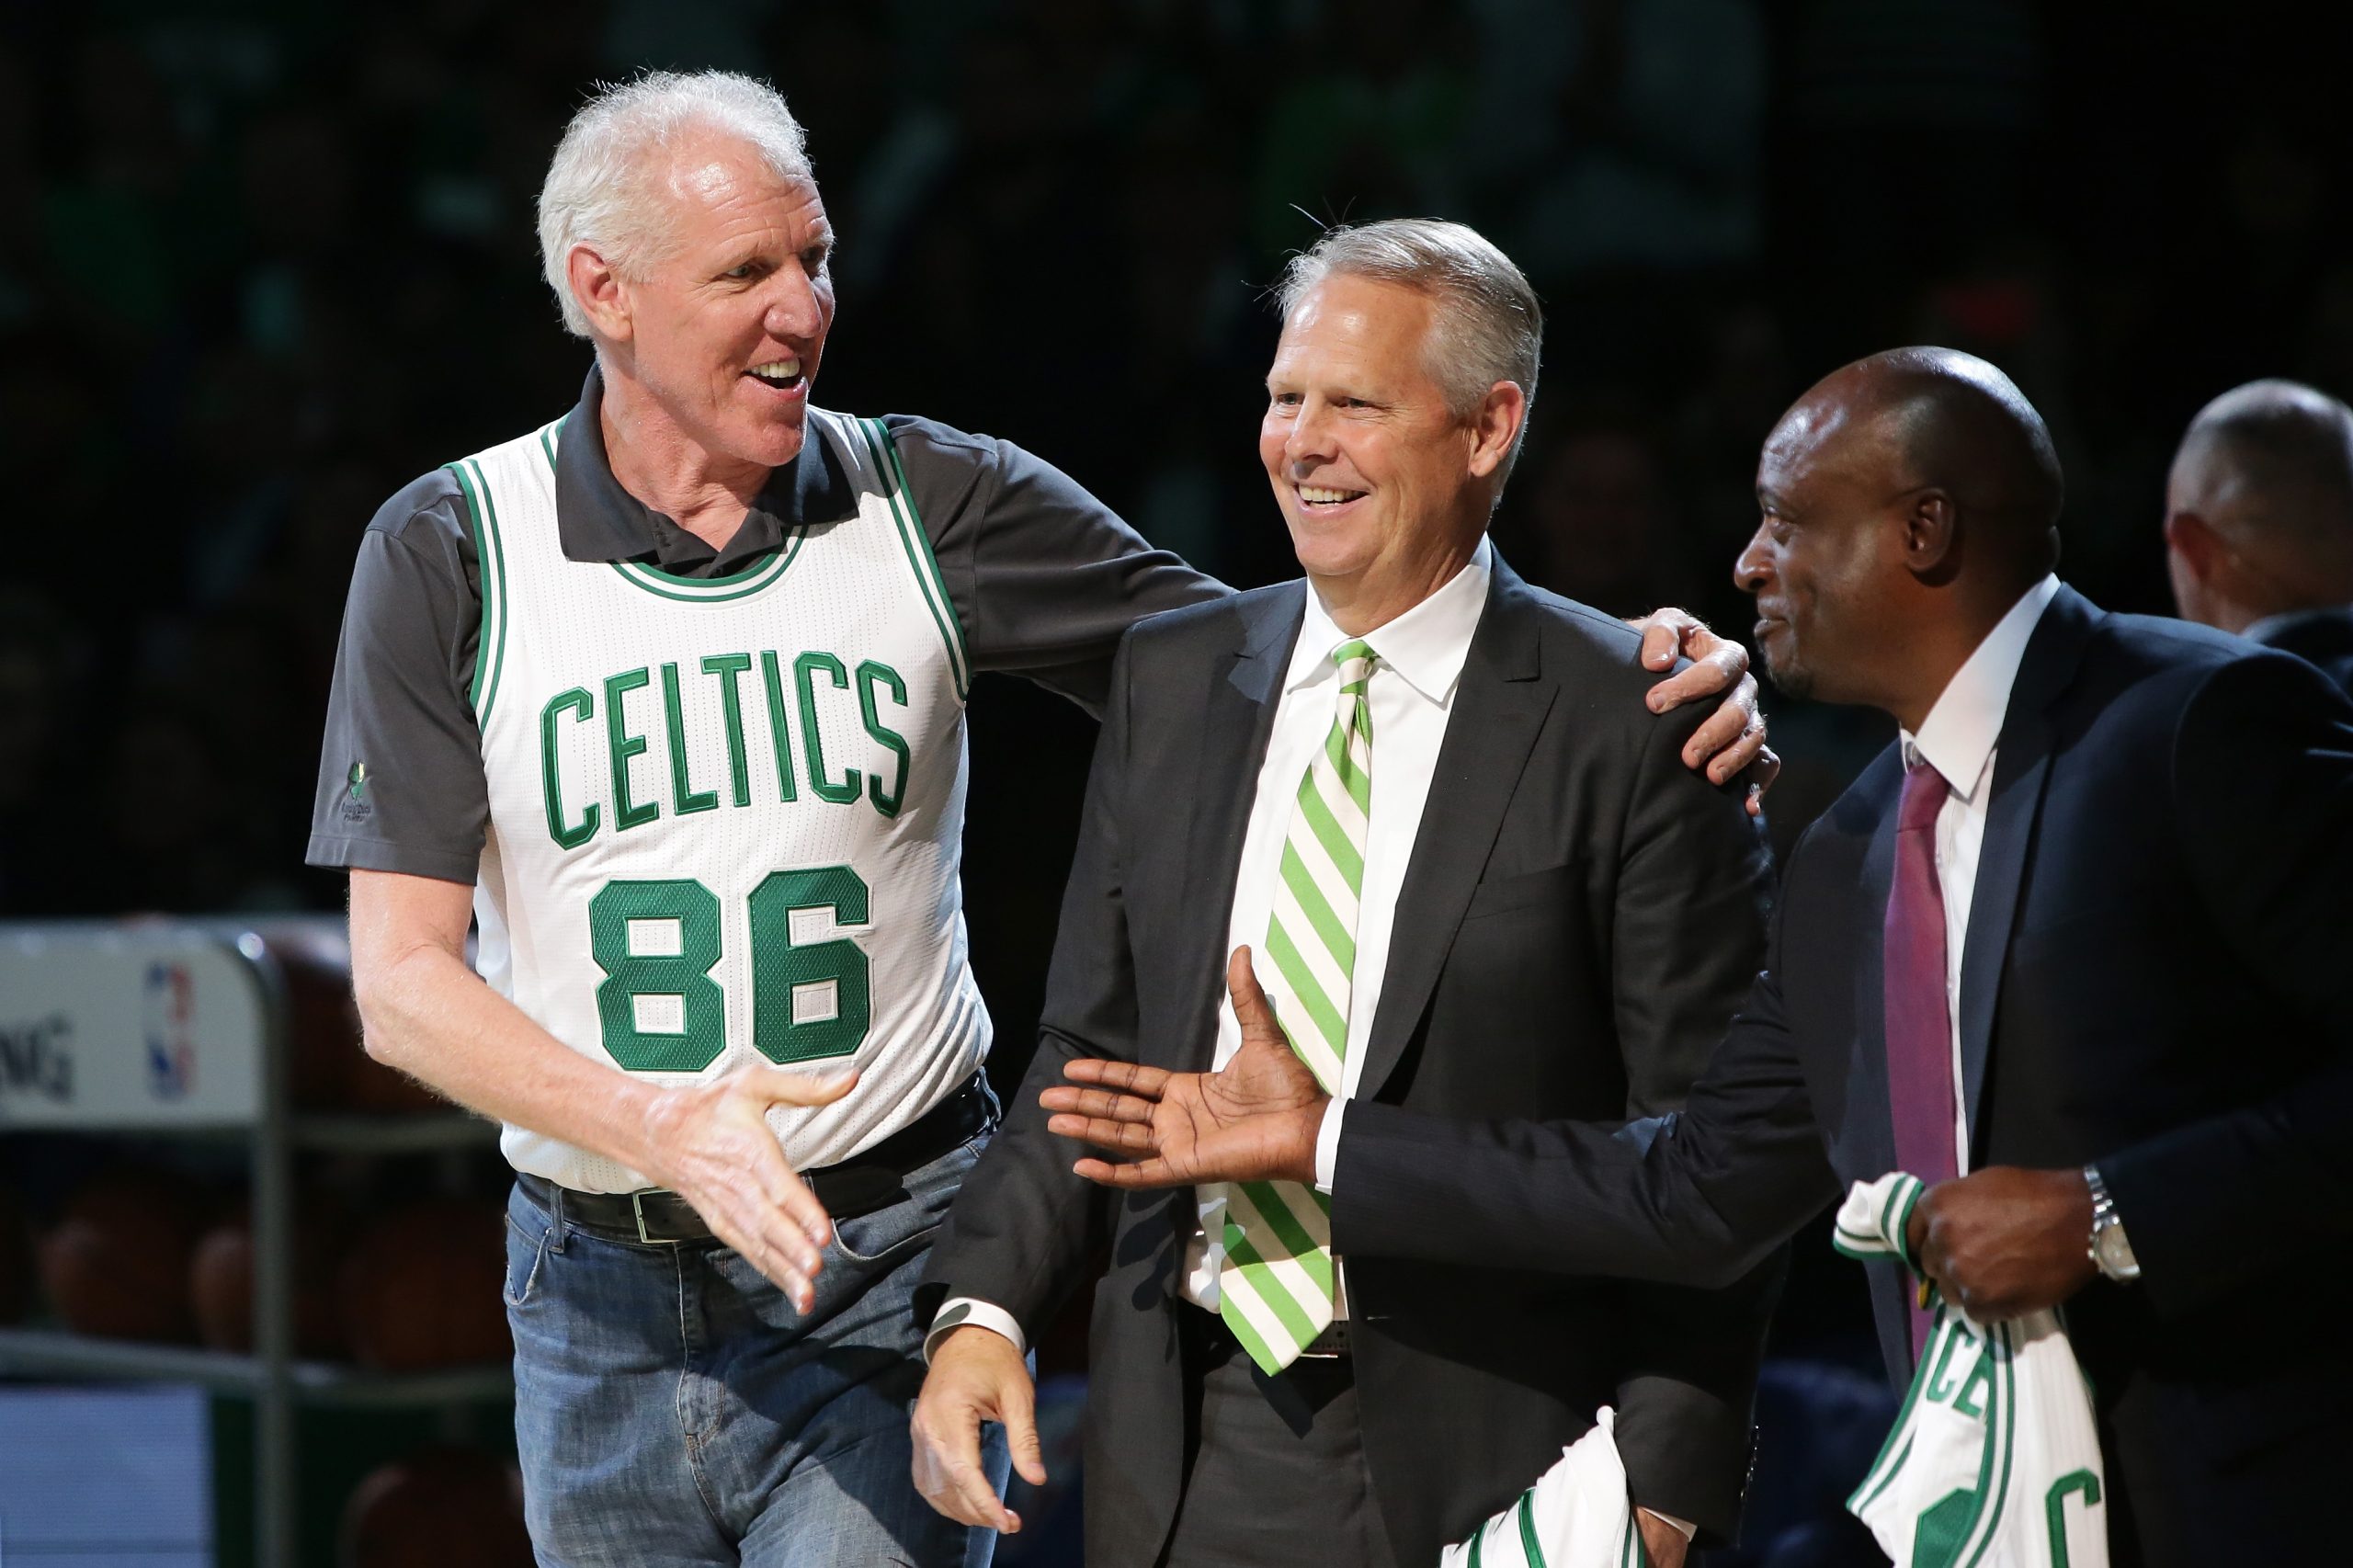 Members of the Boston Celtics 1986 championship team Bill Walton and Danny Ainge are honored at halftime of the game between the Boston Celtics and Miami Heat.